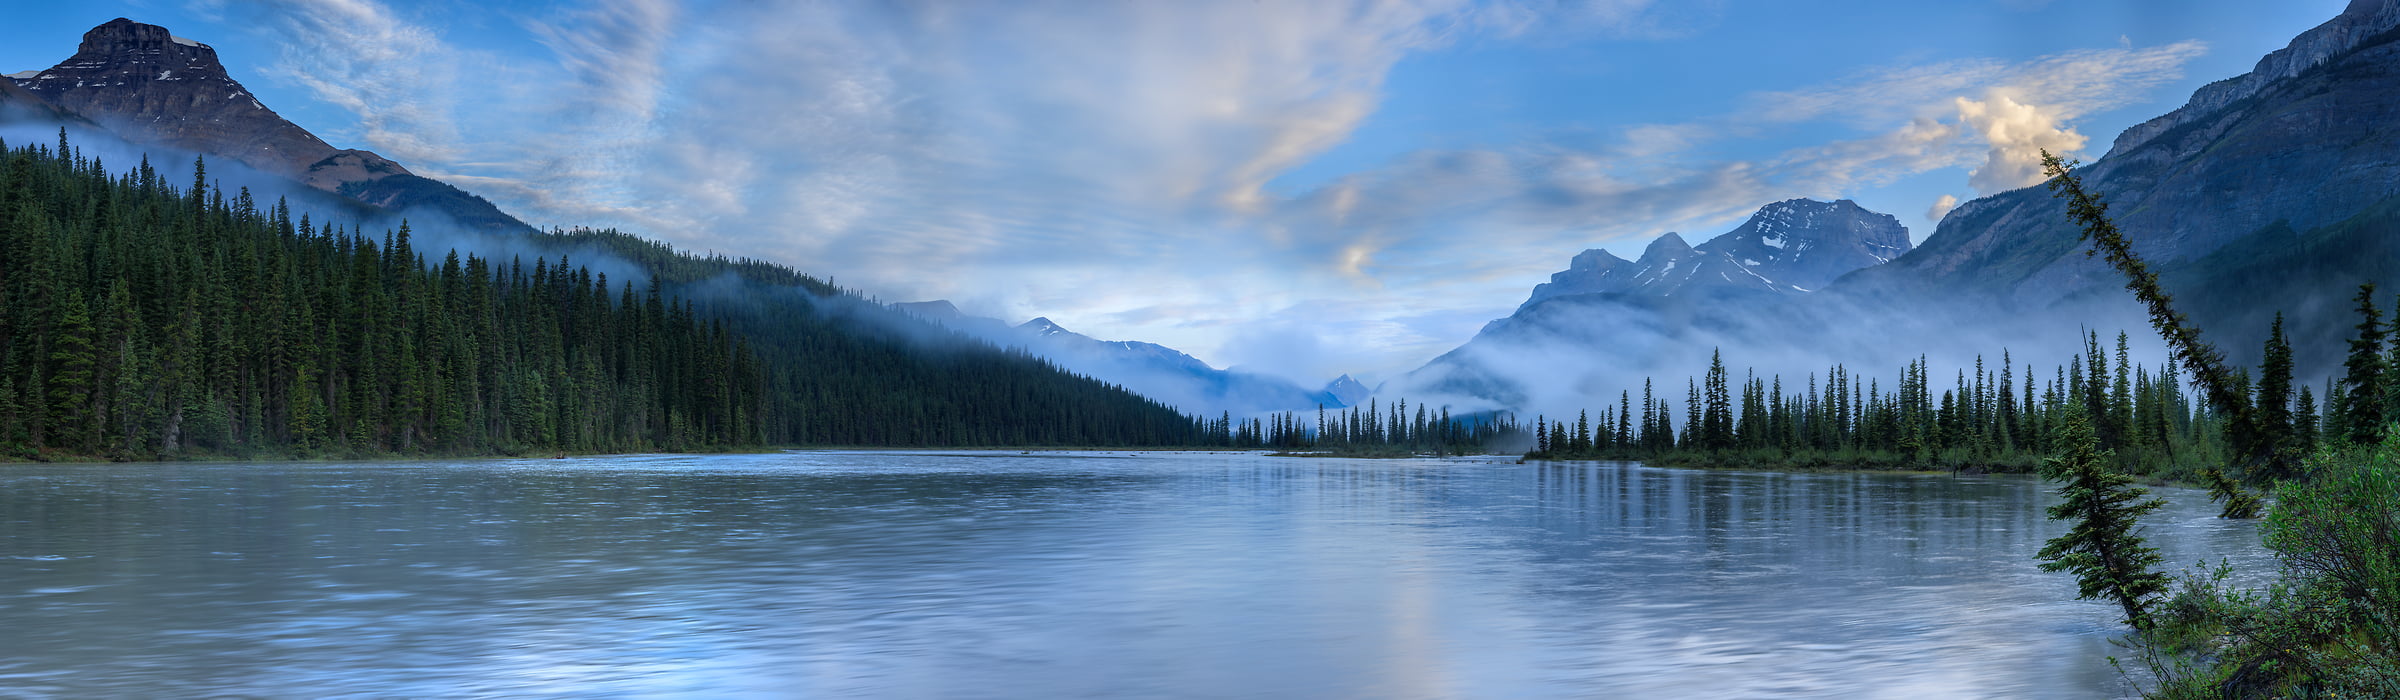 570 megapixels! A very high resolution, large-format VAST photo print of a peaceful lake in the morning with some foggy mist rising; landscape photograph created by Scott Dimond in Banff National Park, Alberta, Canada.